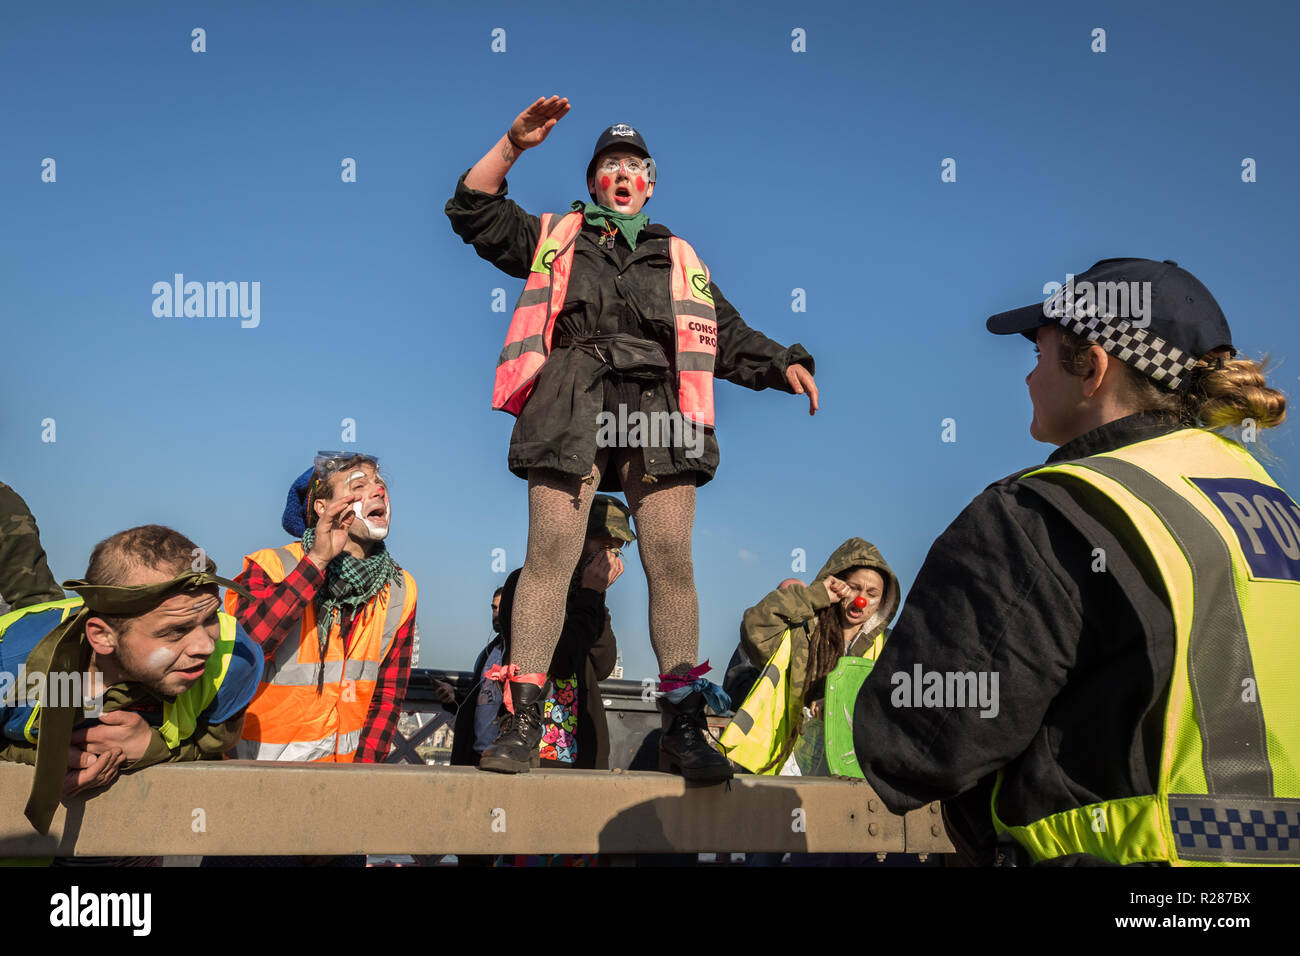 London, UK. 17th November, 2018. Environmental campaigners from Extinction Rebellion block Lambeth Bridge, one of five bridges blocked in central London, as part of a Rebellion Day event to highlight 'criminal inaction in the face of climate change catastrophe and ecological collapse' by the UK Government as part of a programme of civil disobedience during which scores of campaigners have been arrested. Credit: Guy Corbishley/Alamy Live News Stock Photo